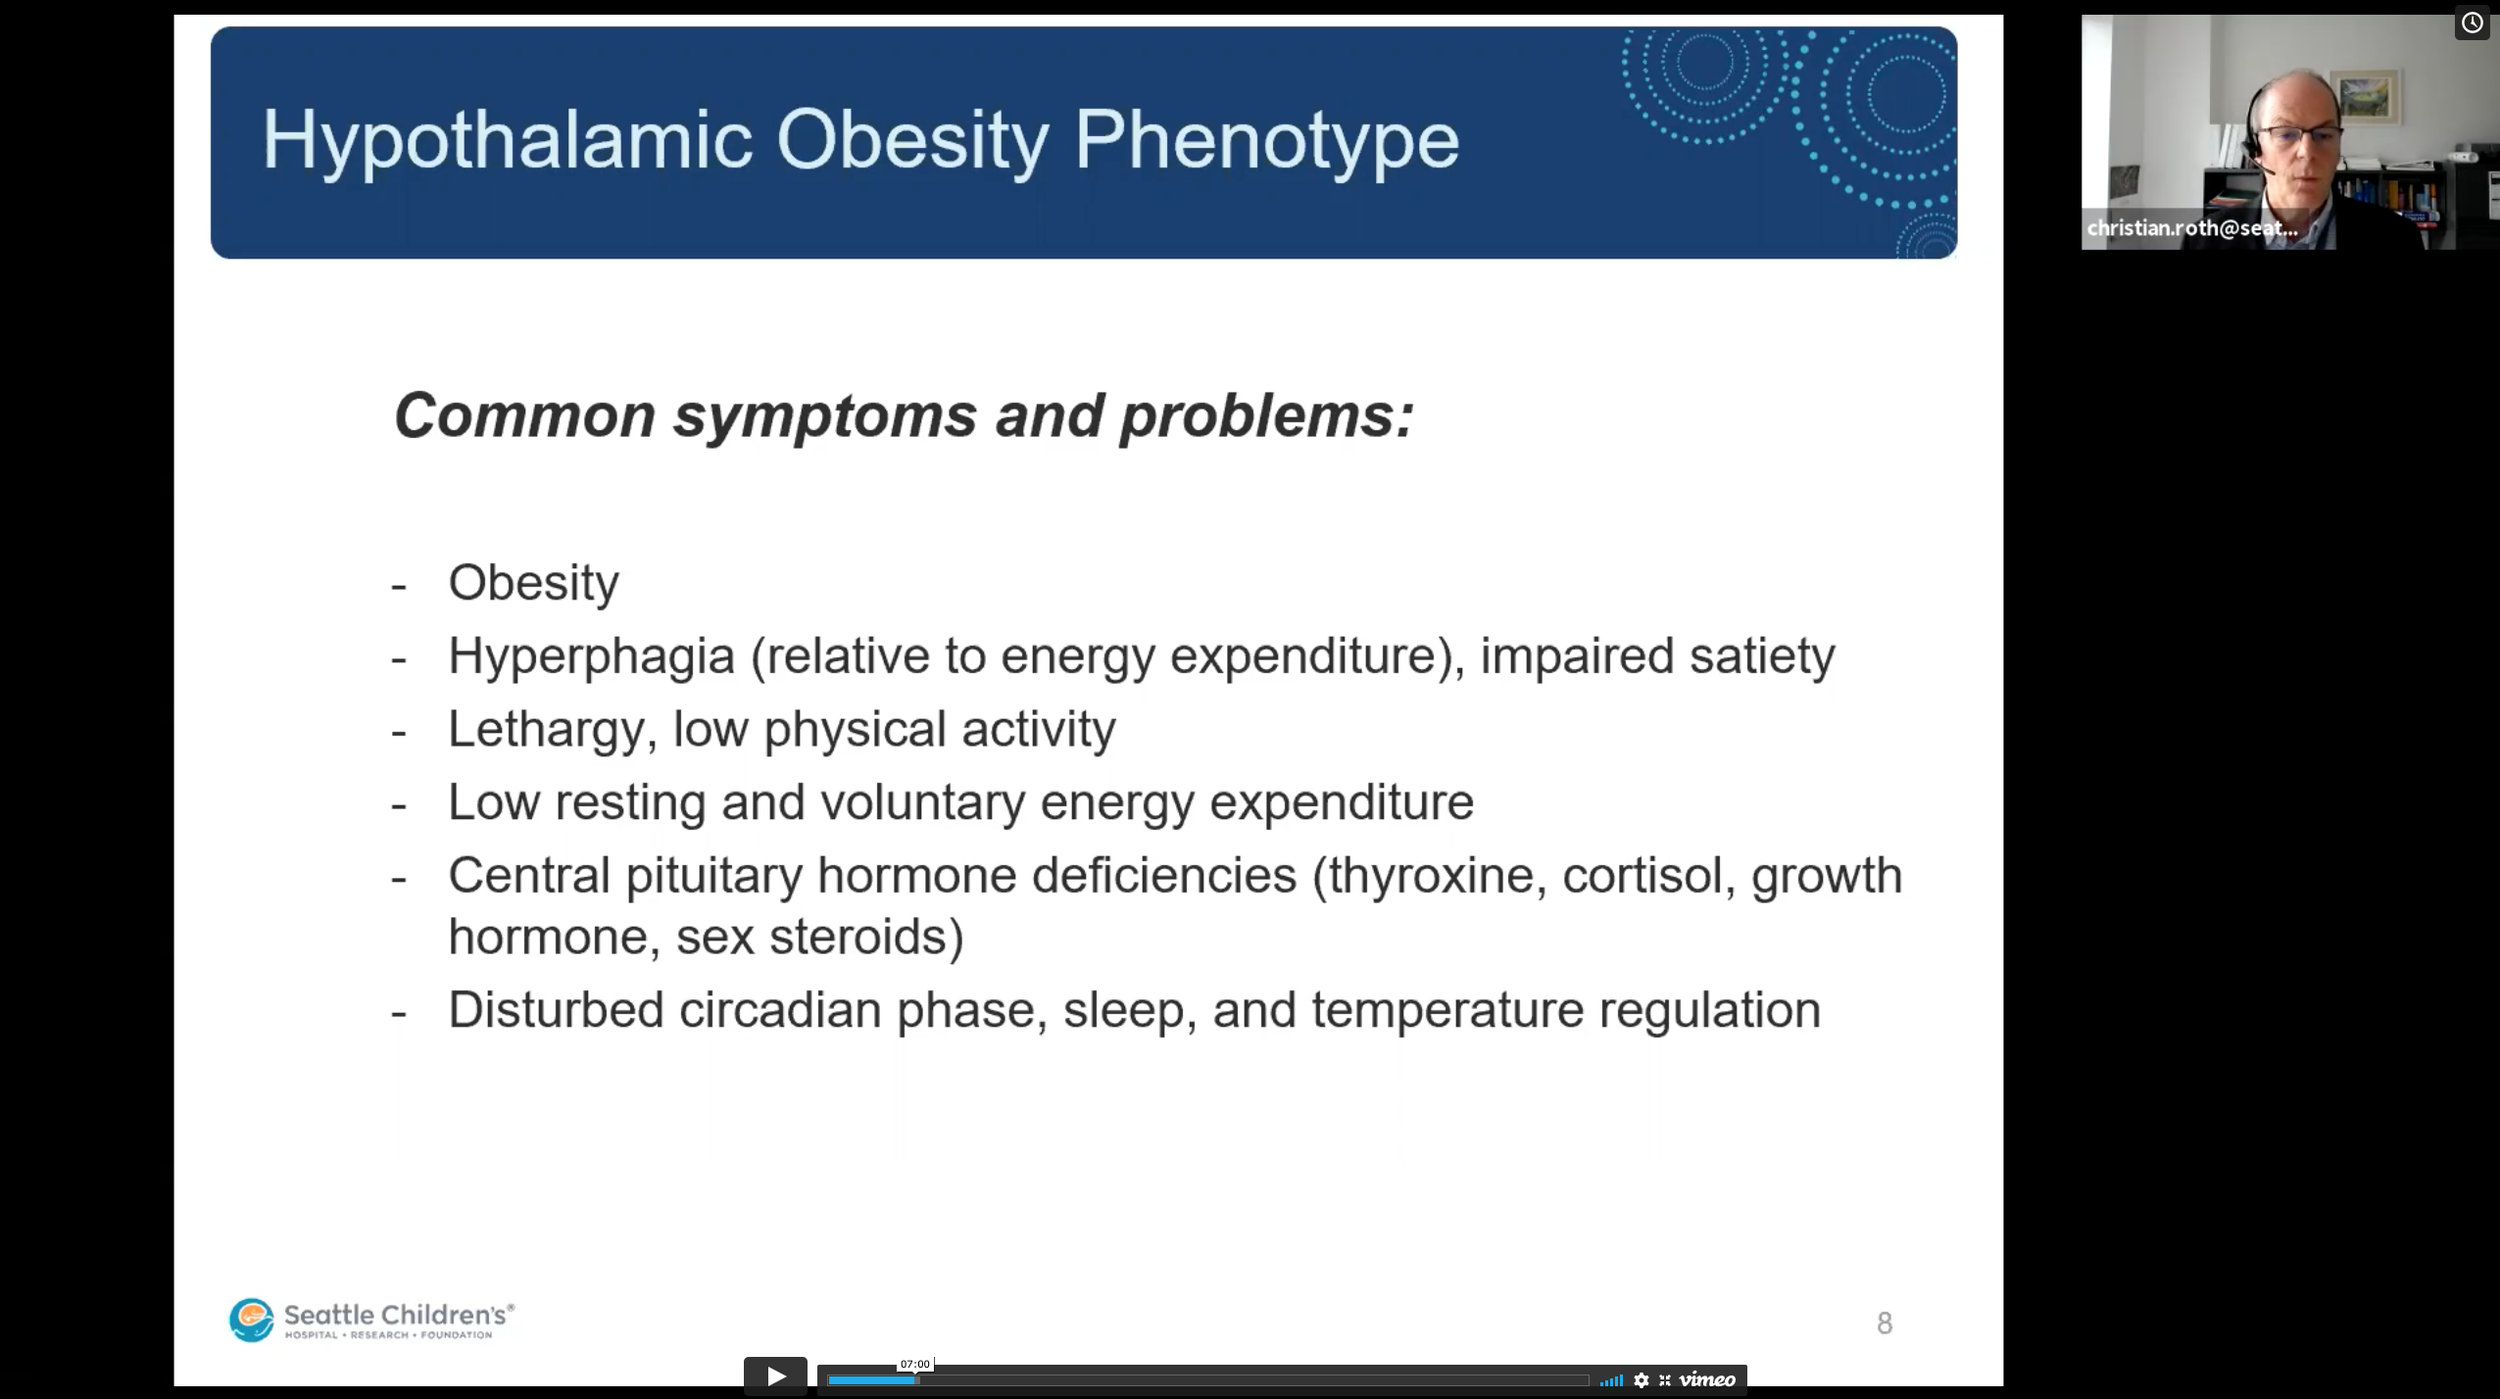 Dr. Christian Roth of Seattle Children’s Hospital, presents on Hypothalamic Obesity at the Pituitary Tumor Virtual Conference hosted by RAWF and CHOP.